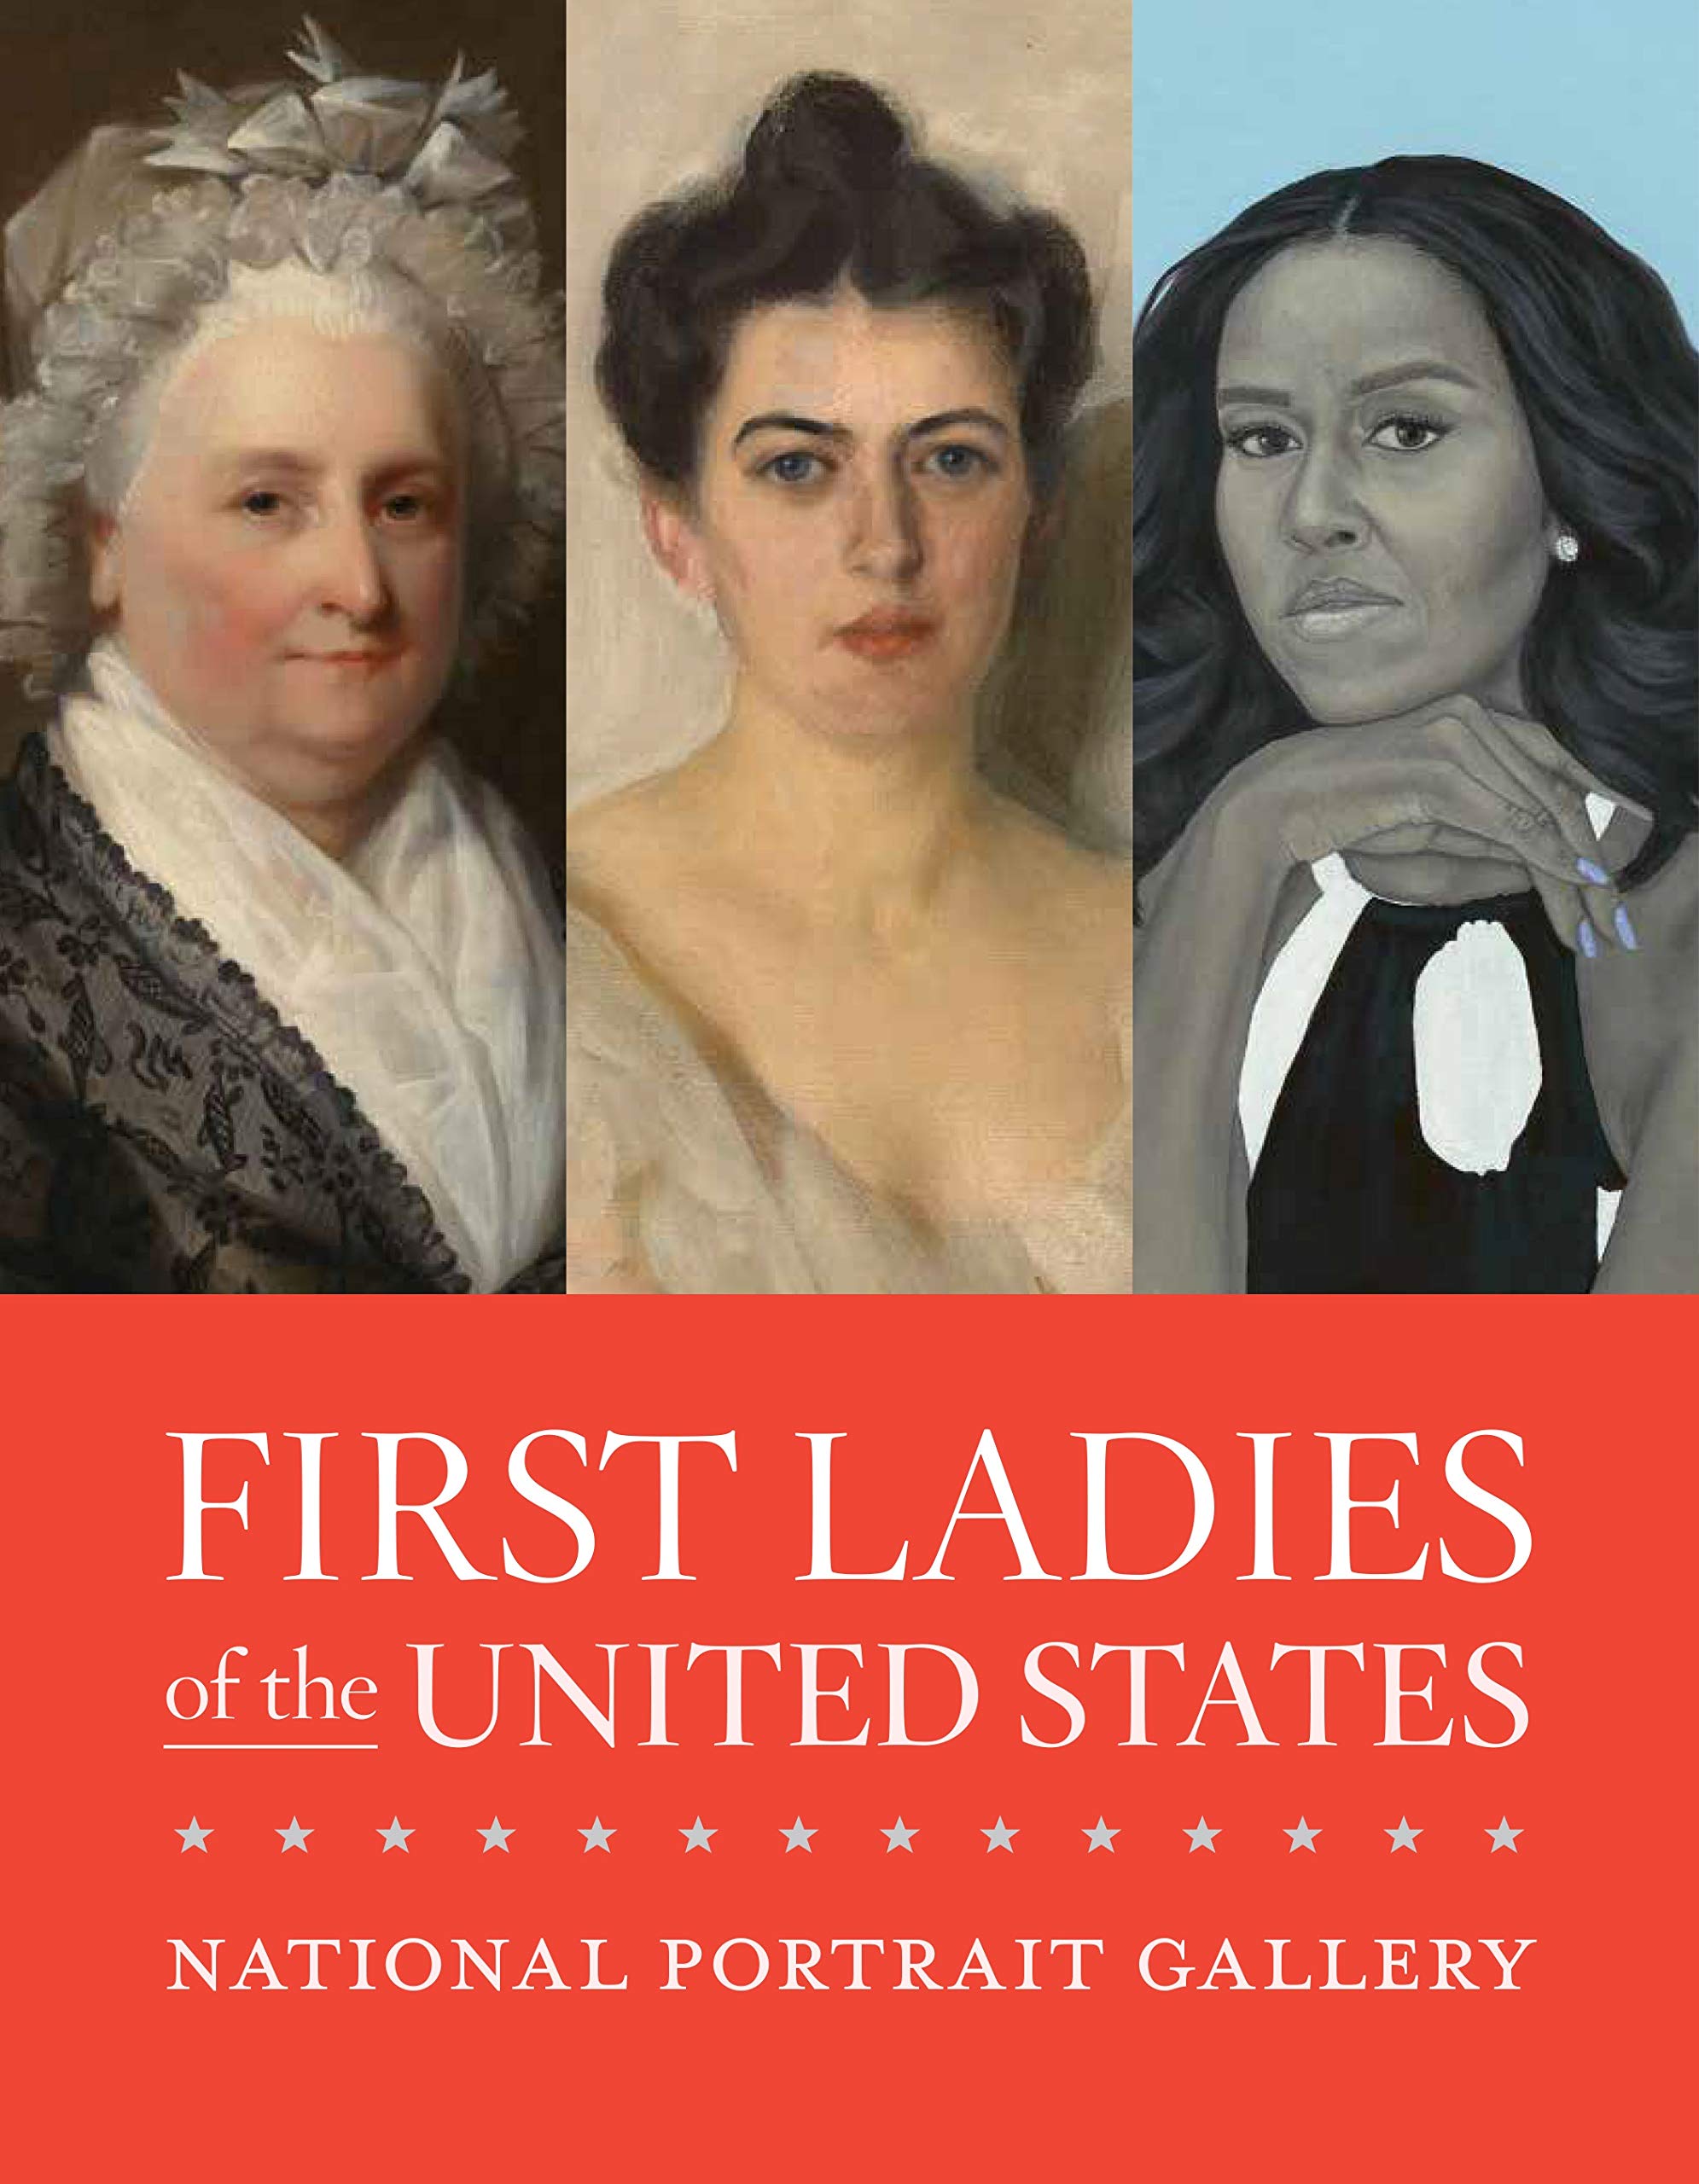 First Ladies of the United States National Portrait Gallery